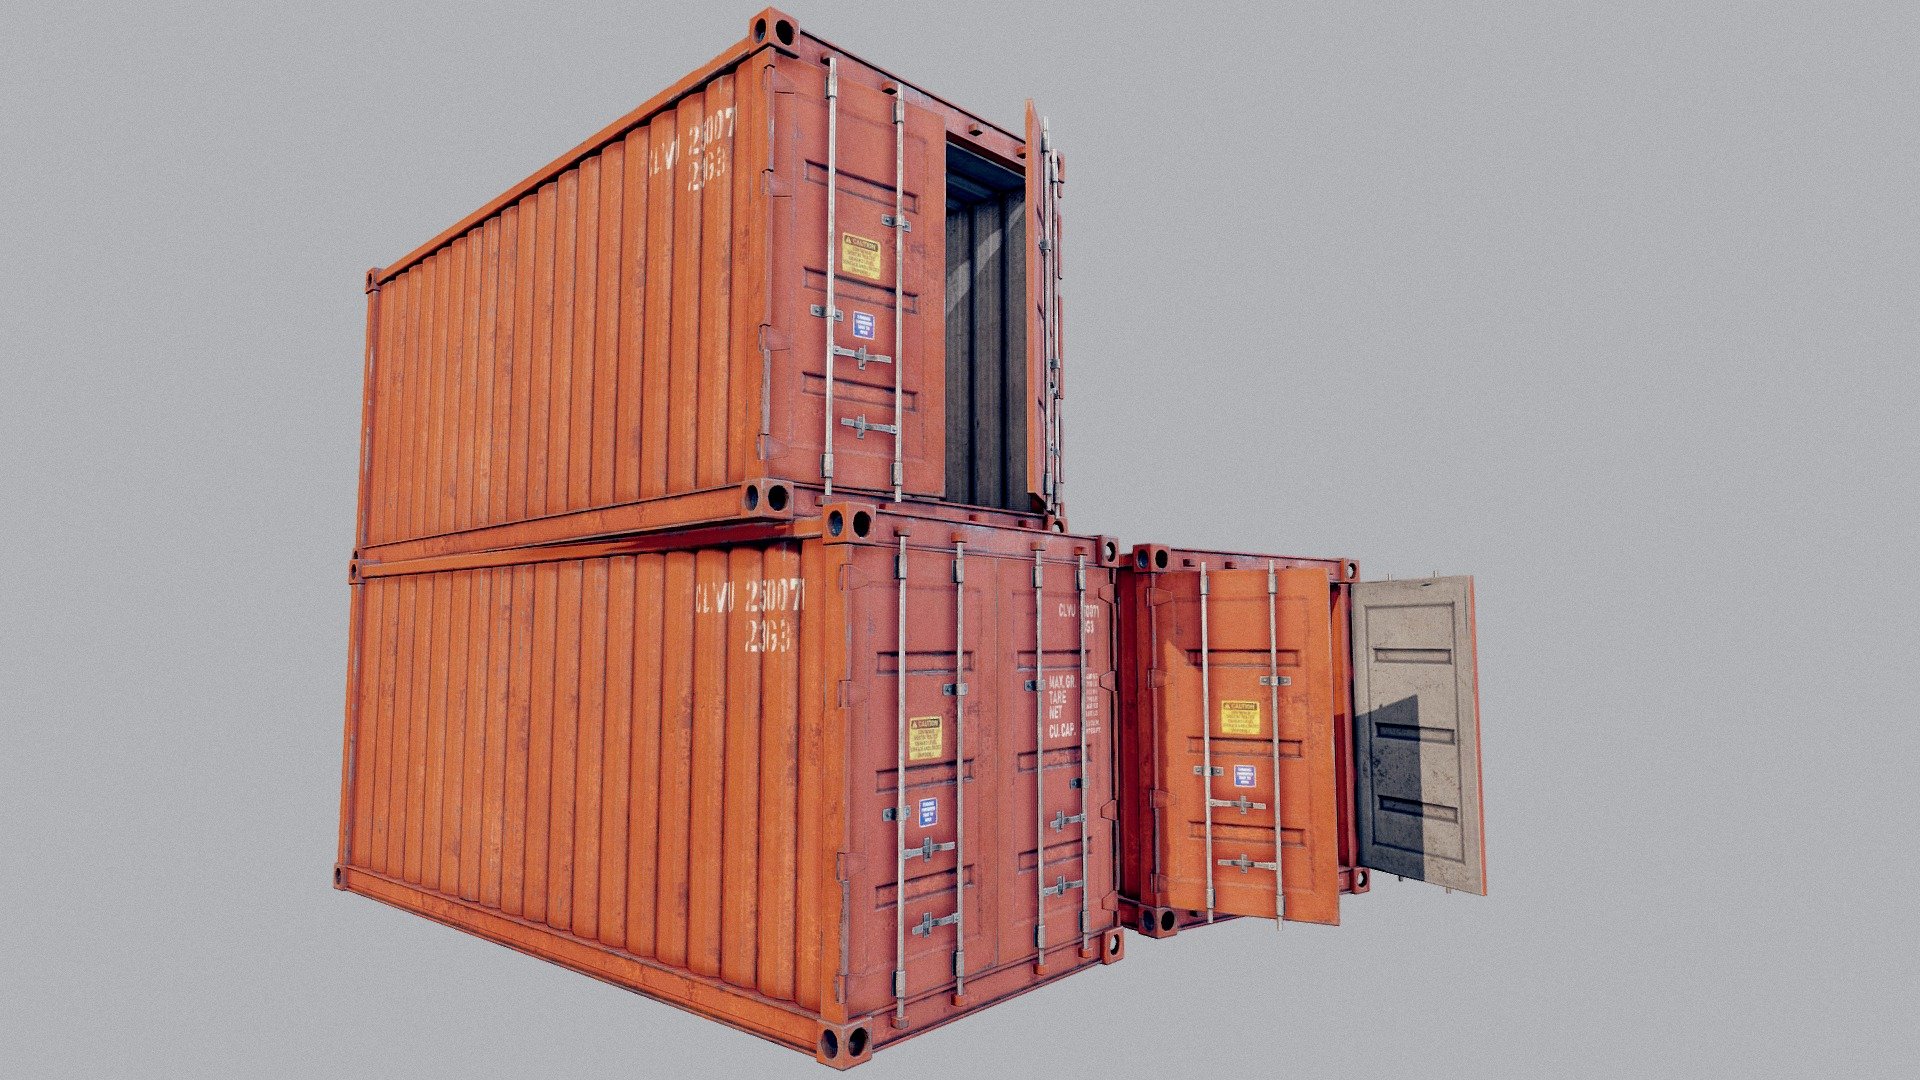 Enterable Shipping Container 01 - PBR

Very Detailed Low Poly Shipping Container with Interior, with High-Quality PBR Textures.

Because several Requests, i have made this new container which have interior.

Stickers and texts are custom made in photoshop.

Doors can be opened

Fits perfect for any PBR game as Environment Decoration etc.

Created with 3DSMAX, Zbrush and Substance Painter.

Standard Textures
Base Color, Metallic, Roughness, Height, AO, Normal, Maps

Unreal 4 Textures
Base Color, Normal, OcclusionRoughnessMetallic

Unity 5/2017 Textures
Albedo, SpecularSmoothness, Normal, and AO Maps

2x4096x4096 TGA Textures

Please Note, this PBR Textures Only. 

Low Poly Triangles 

7454 Tris
4530 Verts

File Formats :

.Max2019
.Max2018
.Max2017
.Max2016
.FBX
.OBJ
.3DS
.DAE - Enterable Shipping Container 01 - PBR - Buy Royalty Free 3D model by GamePoly (@triix3d) 3d model